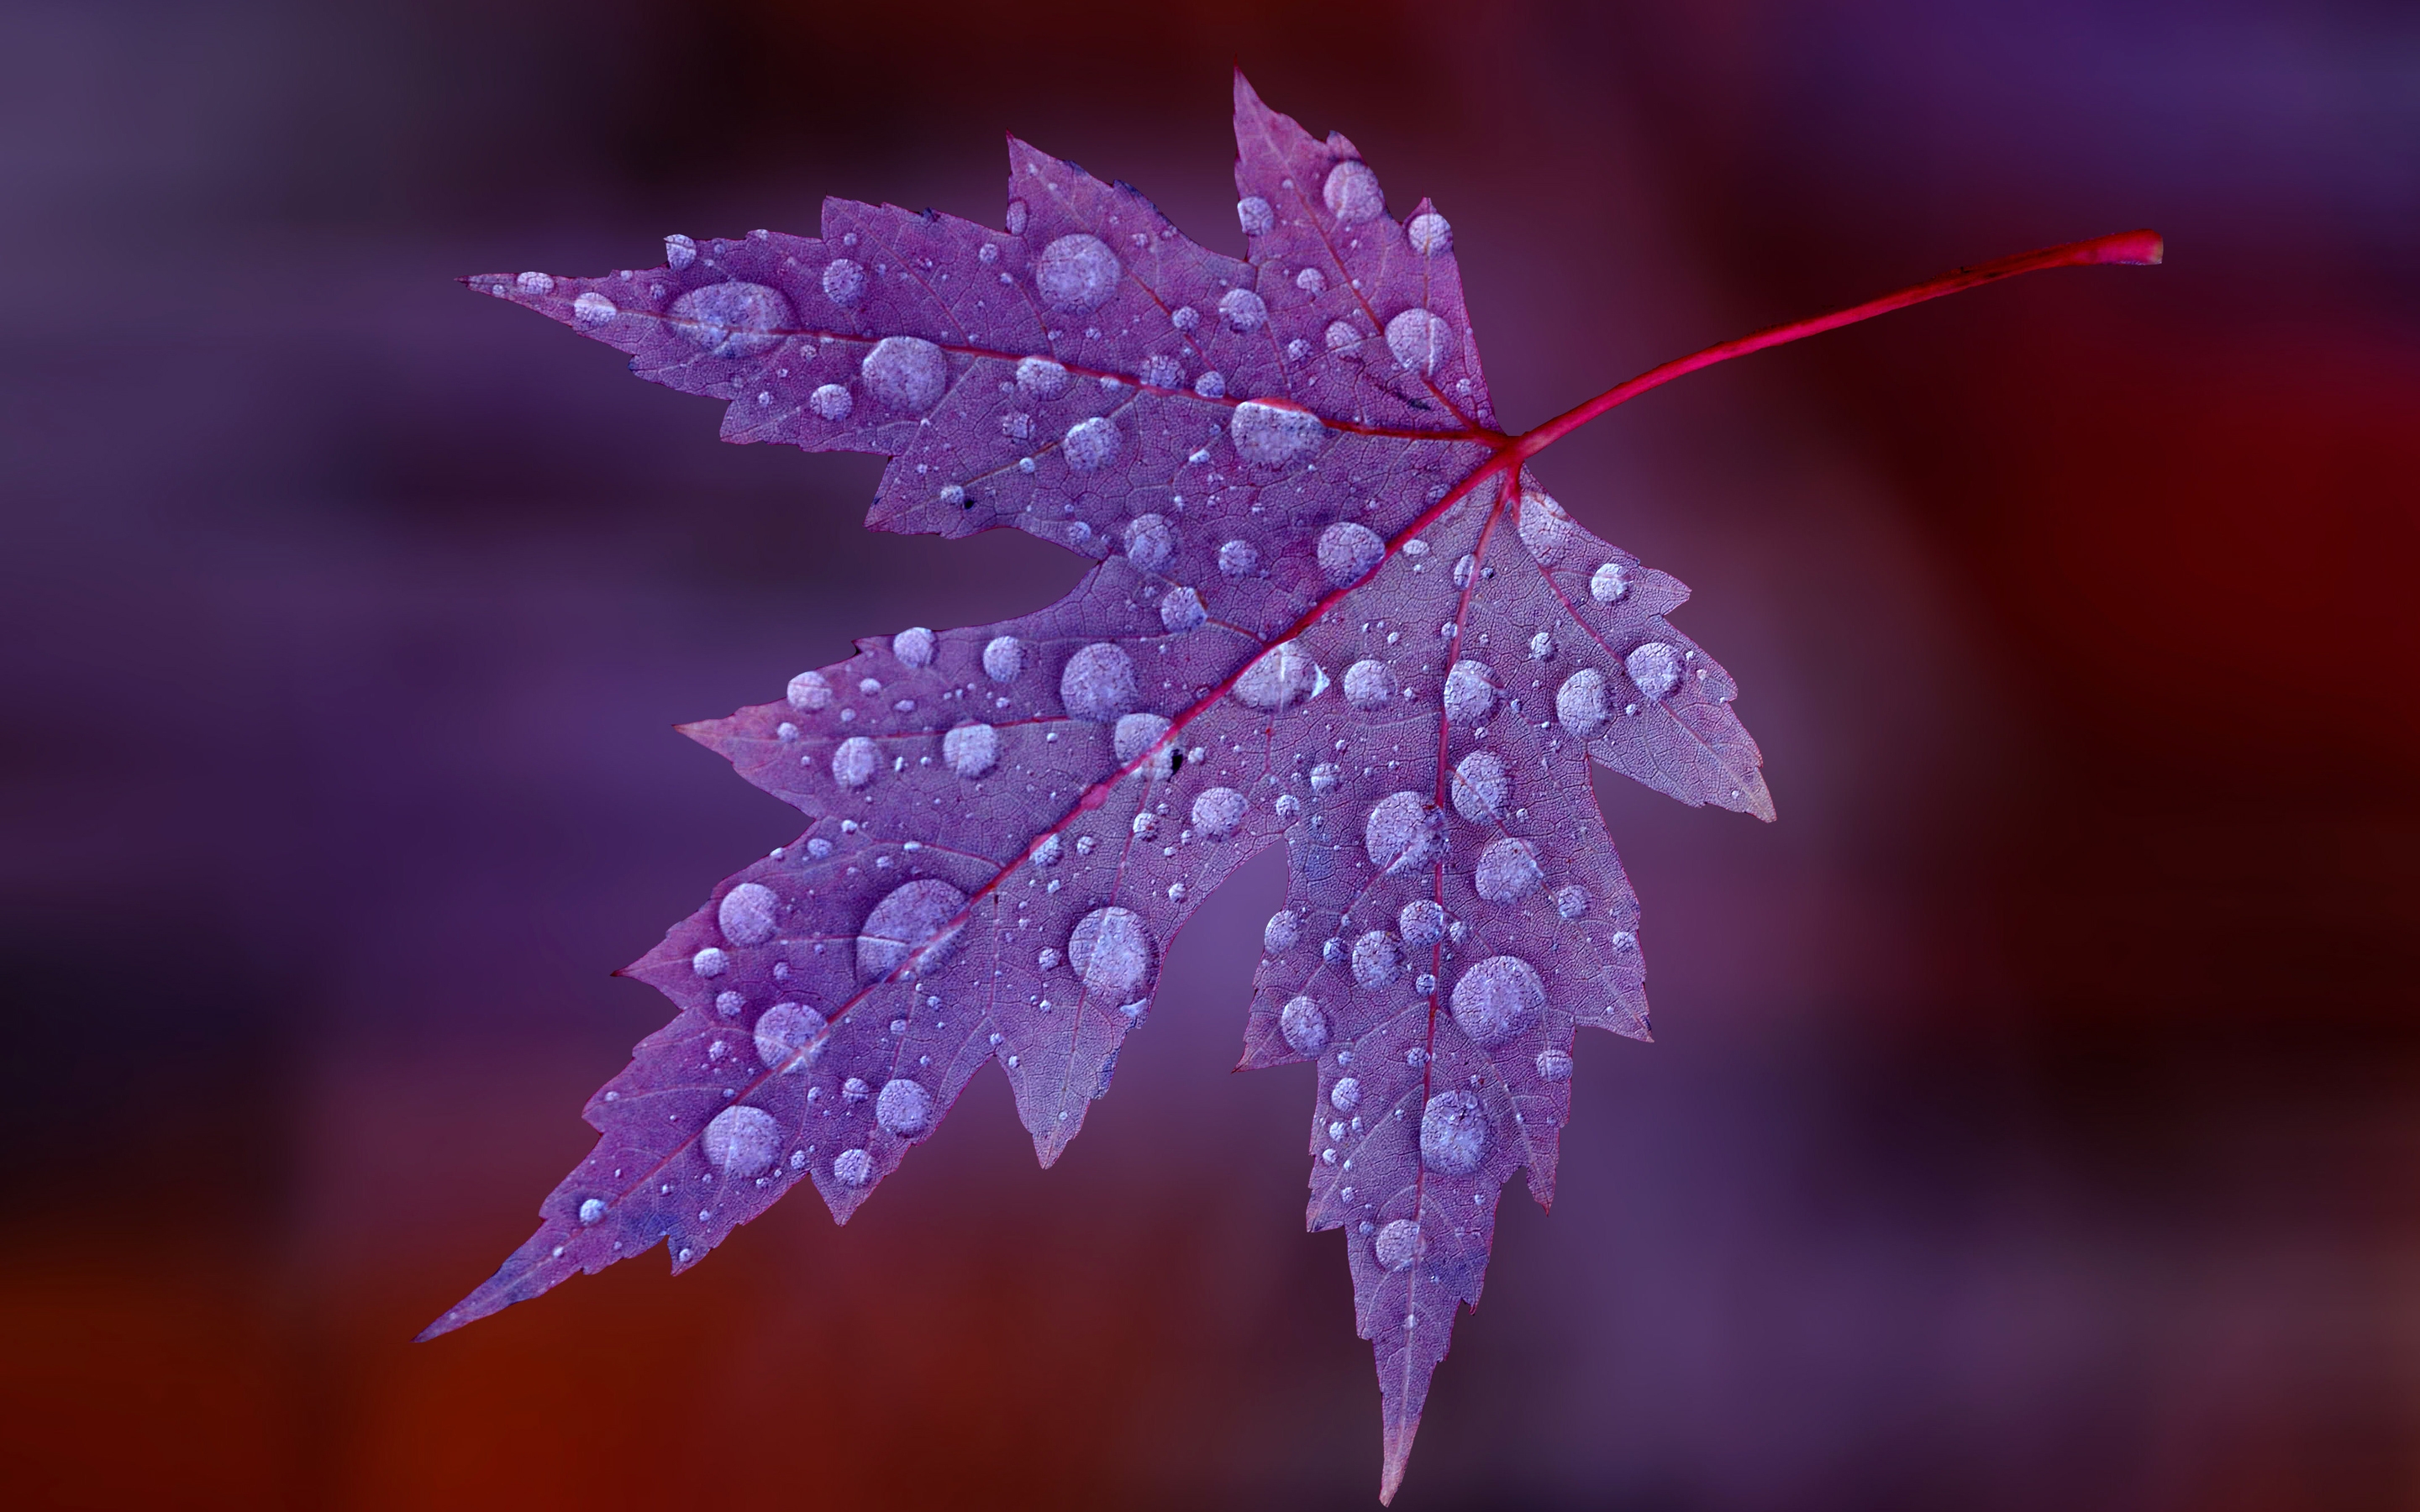 Water Drops on Purple Leaf  for 2880 x 1800 Retina Display resolution